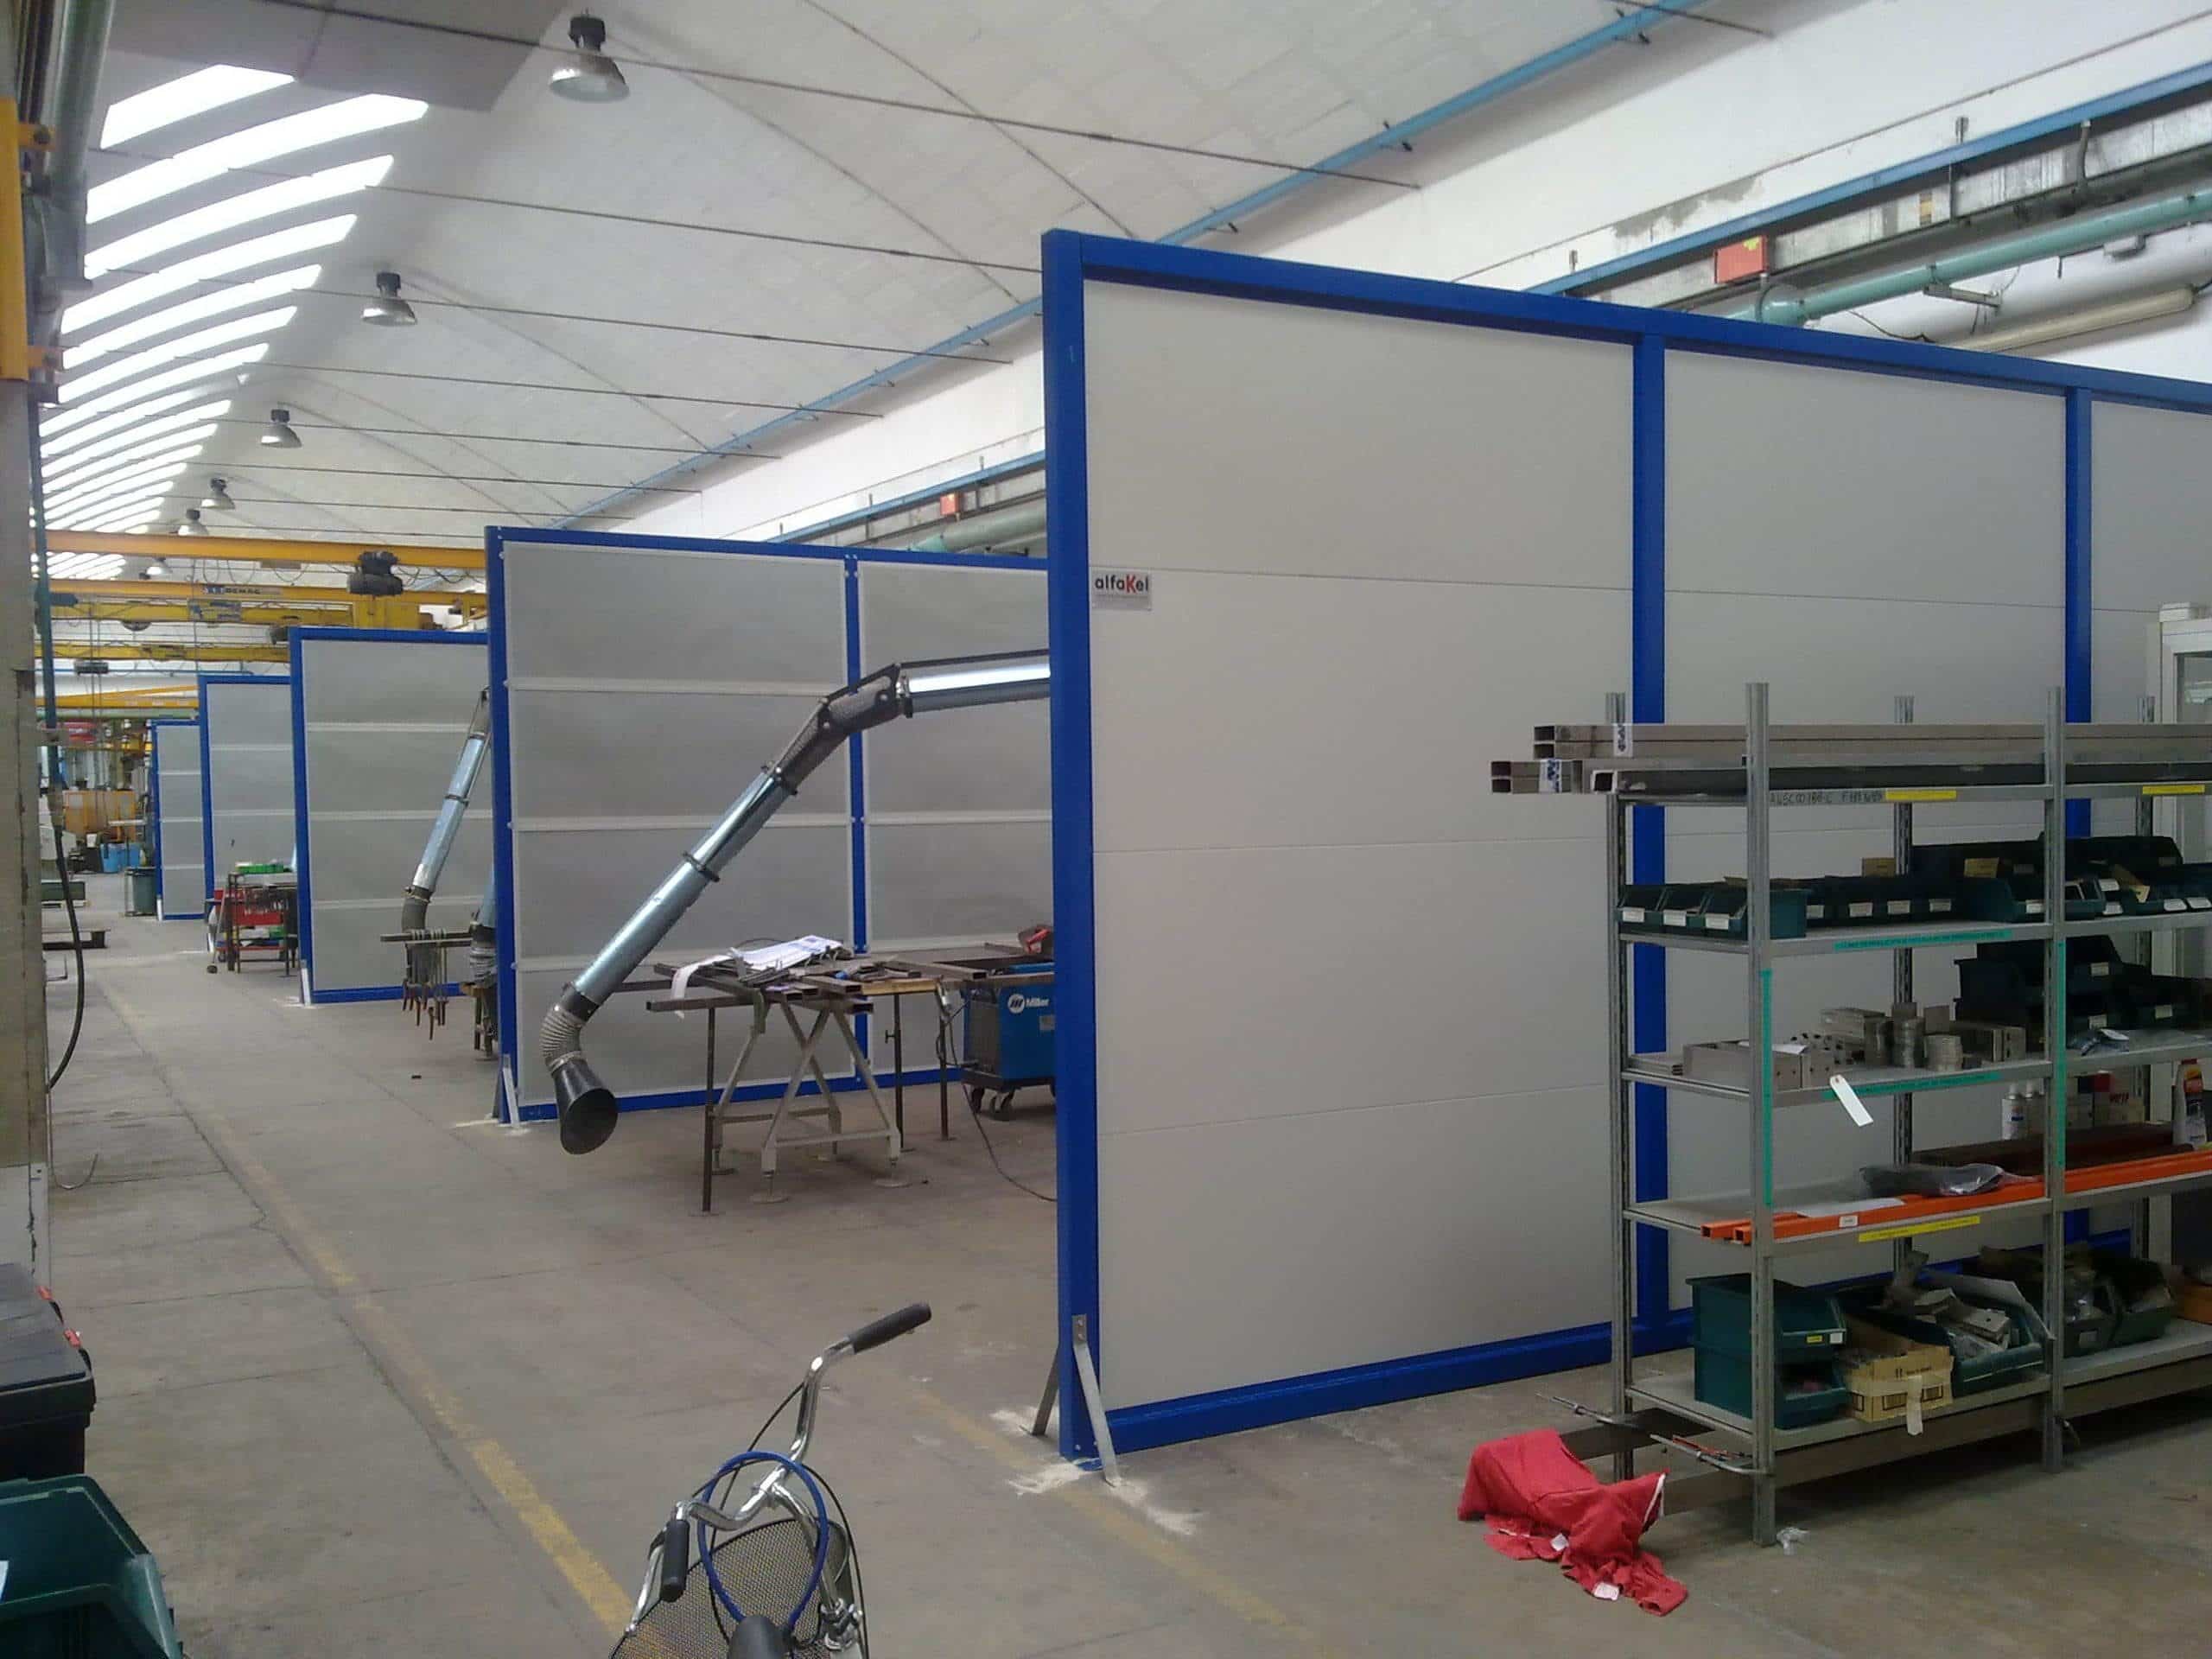 Wheel-mounted Mobile Acoustic Screens and Fixed Screens, Alfakel Series V50/100